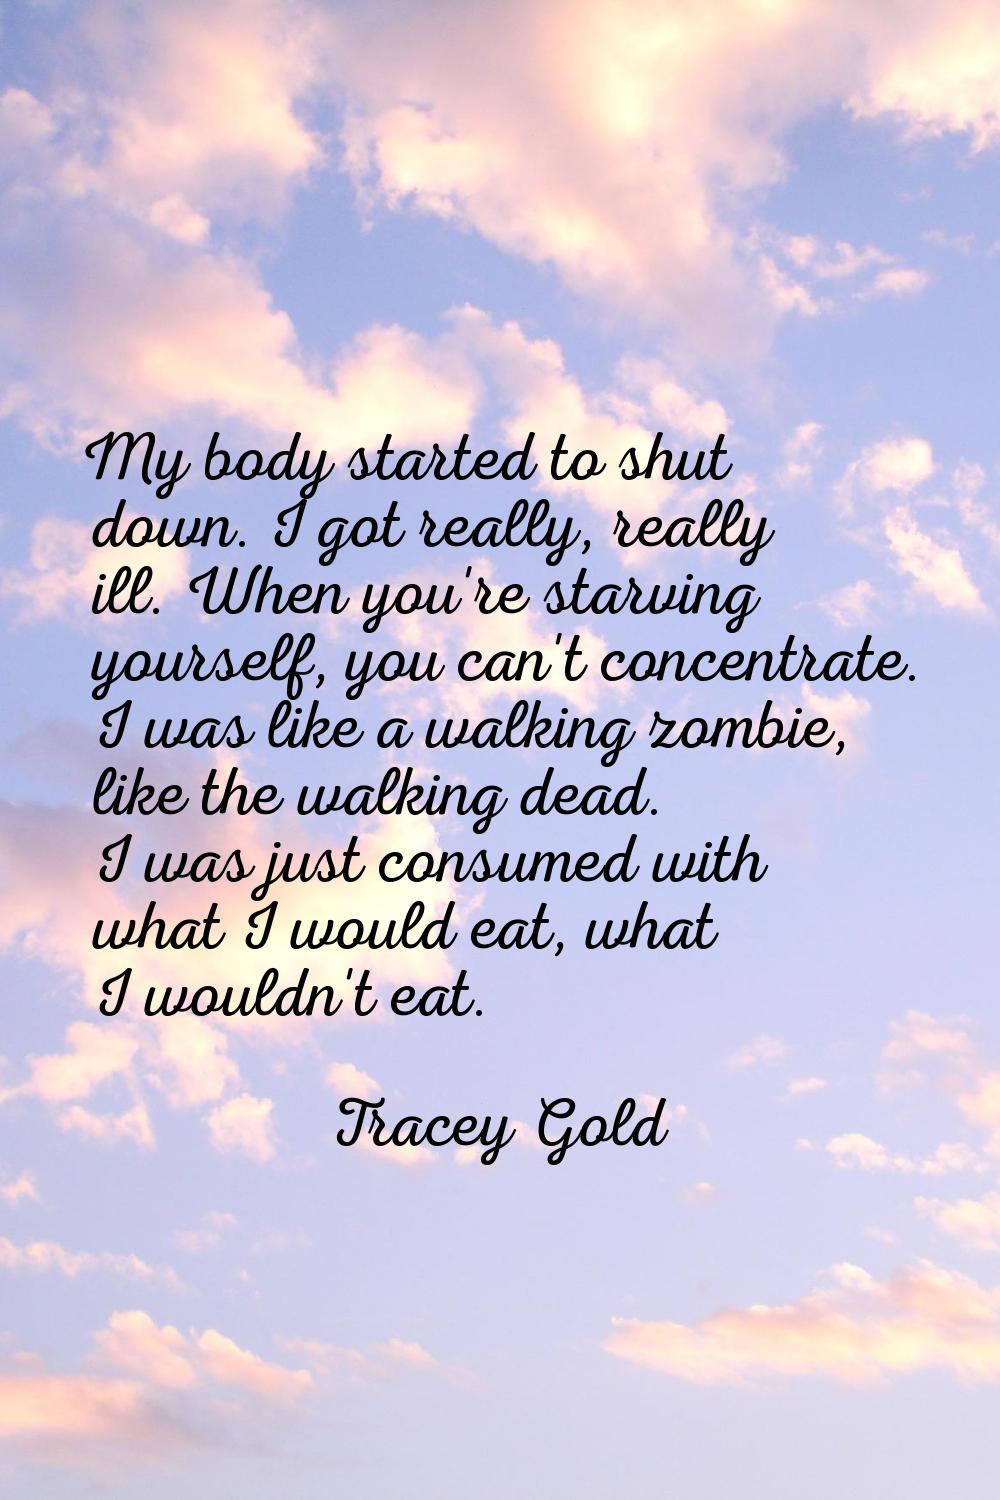 My body started to shut down. I got really, really ill. When you're starving yourself, you can't co